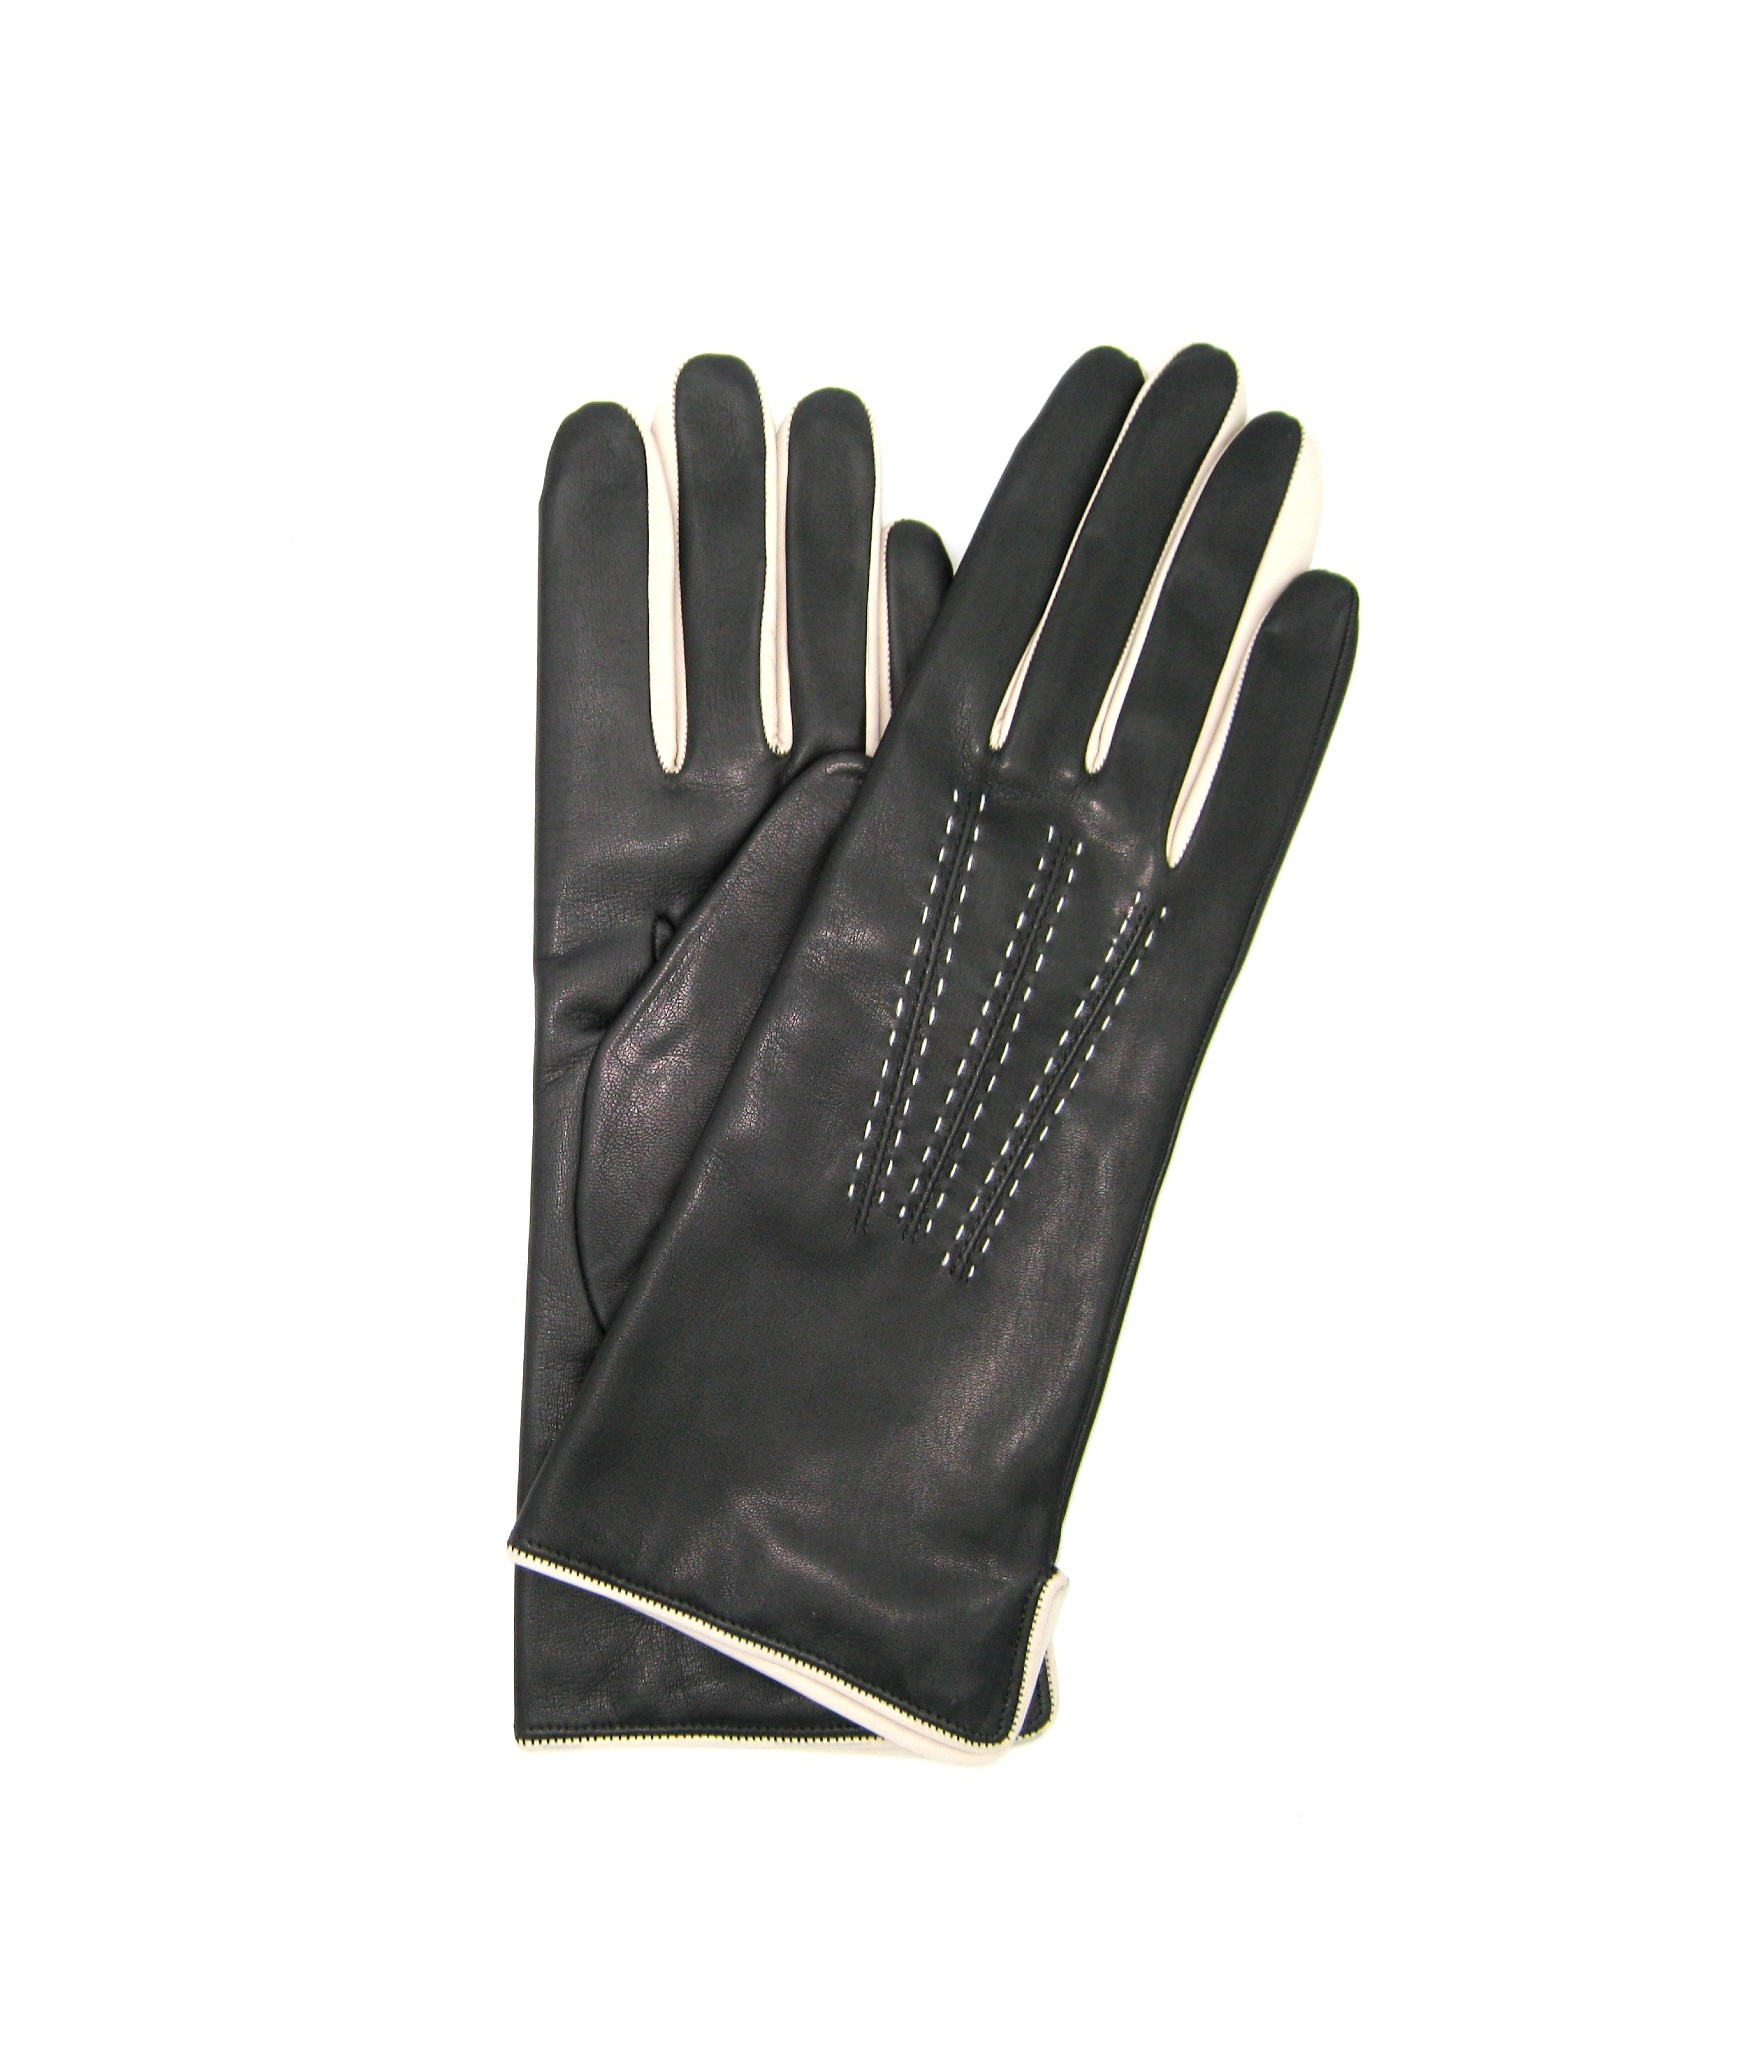 Woman Fashion Nappa leather gloves 4bt cashmere lined bicolor